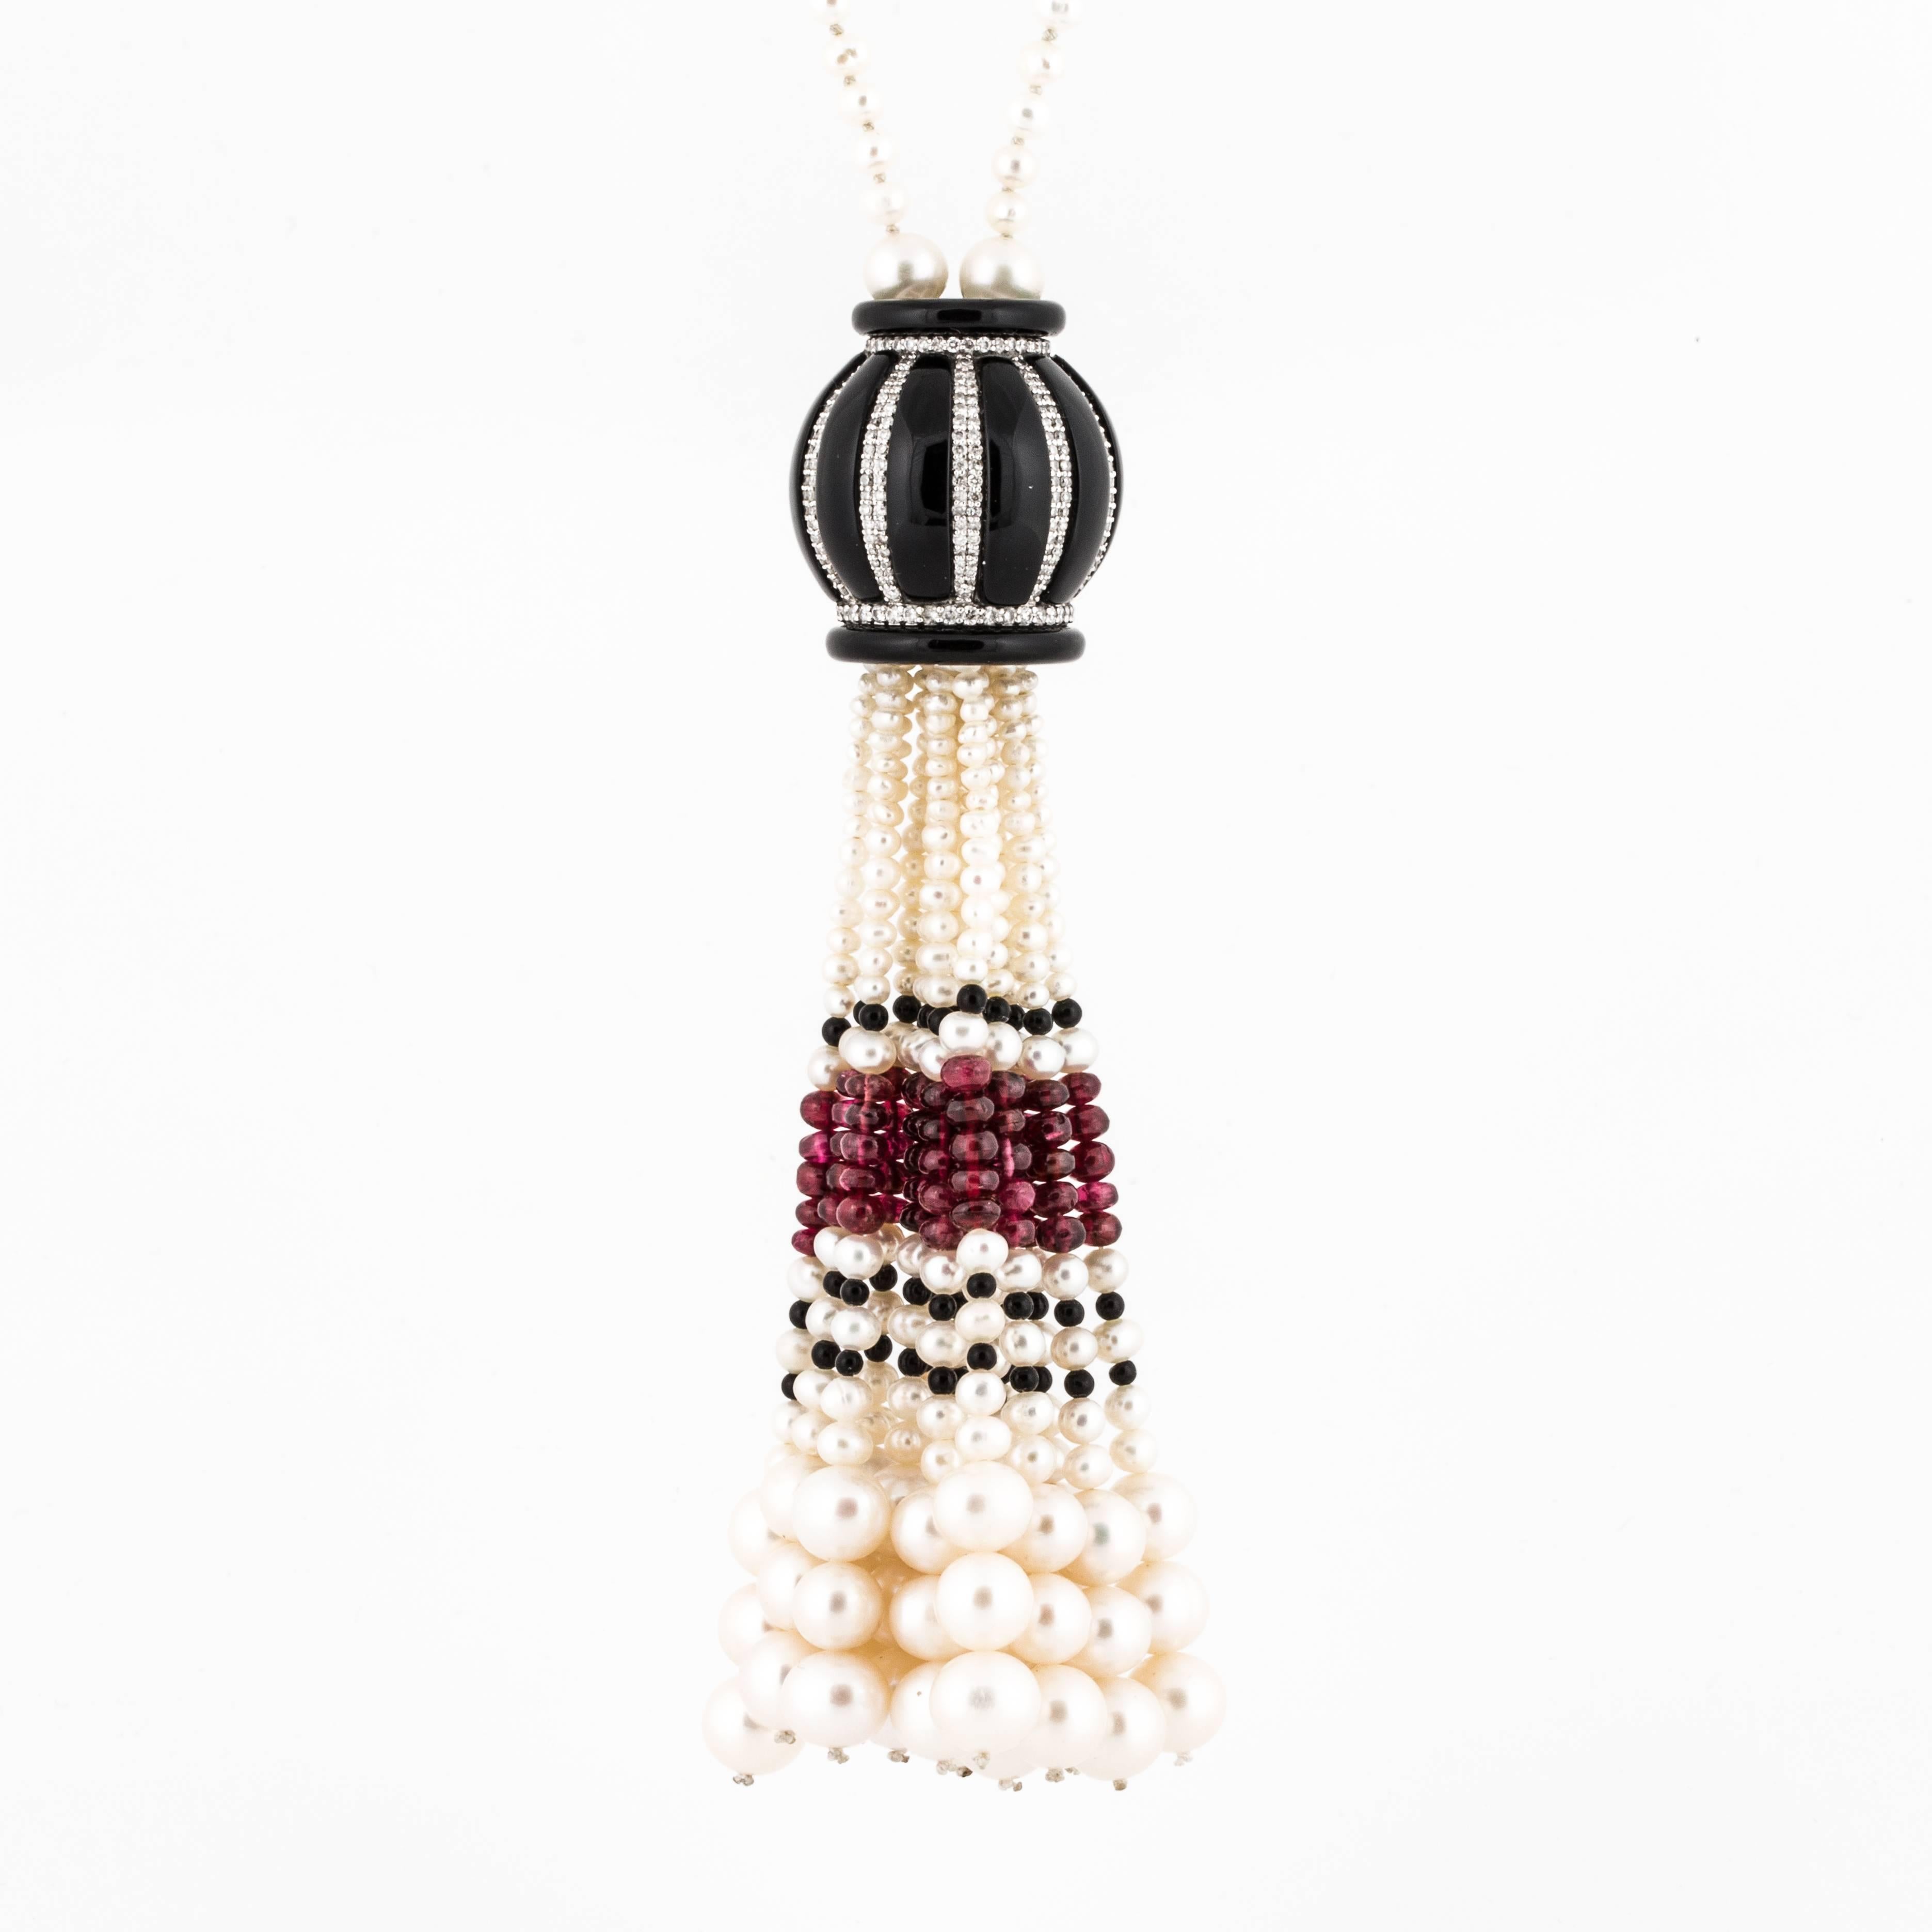 Wonderful necklace featuring cultured pearls, onyx, rubies, coral and diamonds. Total carat weight of the diamonds is 3.10 and they are H-I in color and SI-1 in clarity.  The large tassel is 4.5 long and the necklace portion measures 32".  This